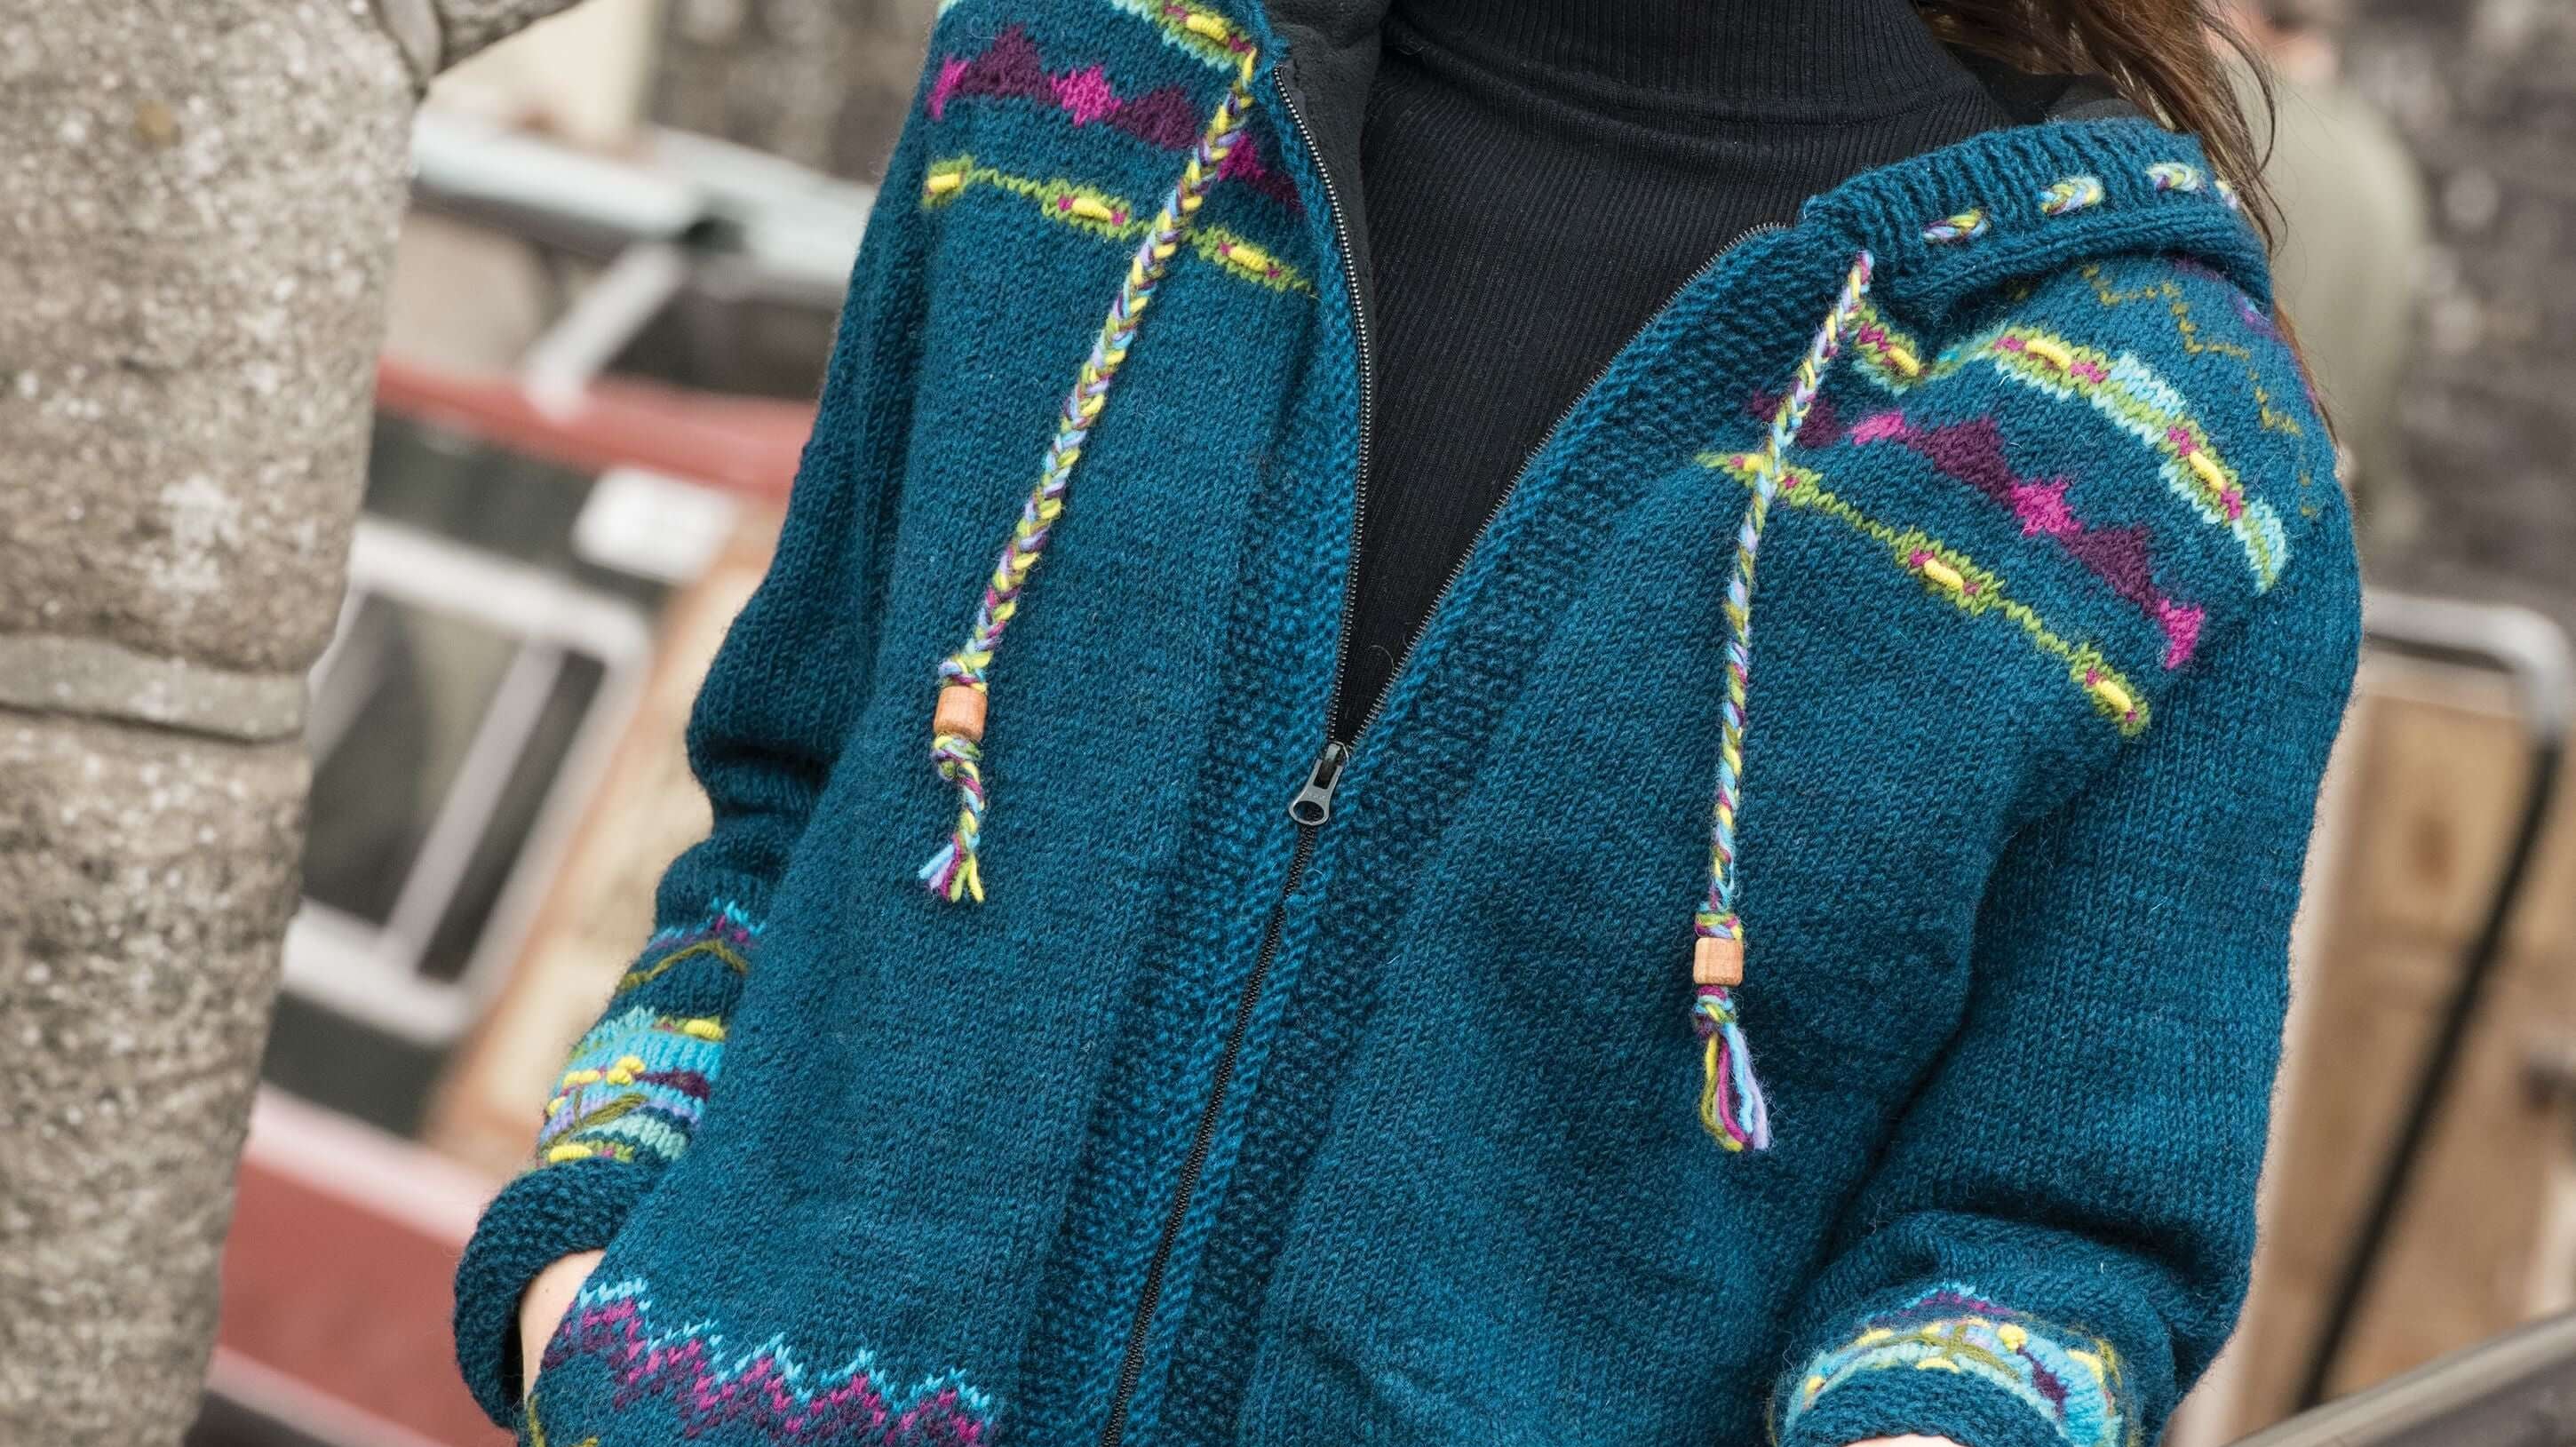 Why You Need a Teal Hand Knitted Jacket